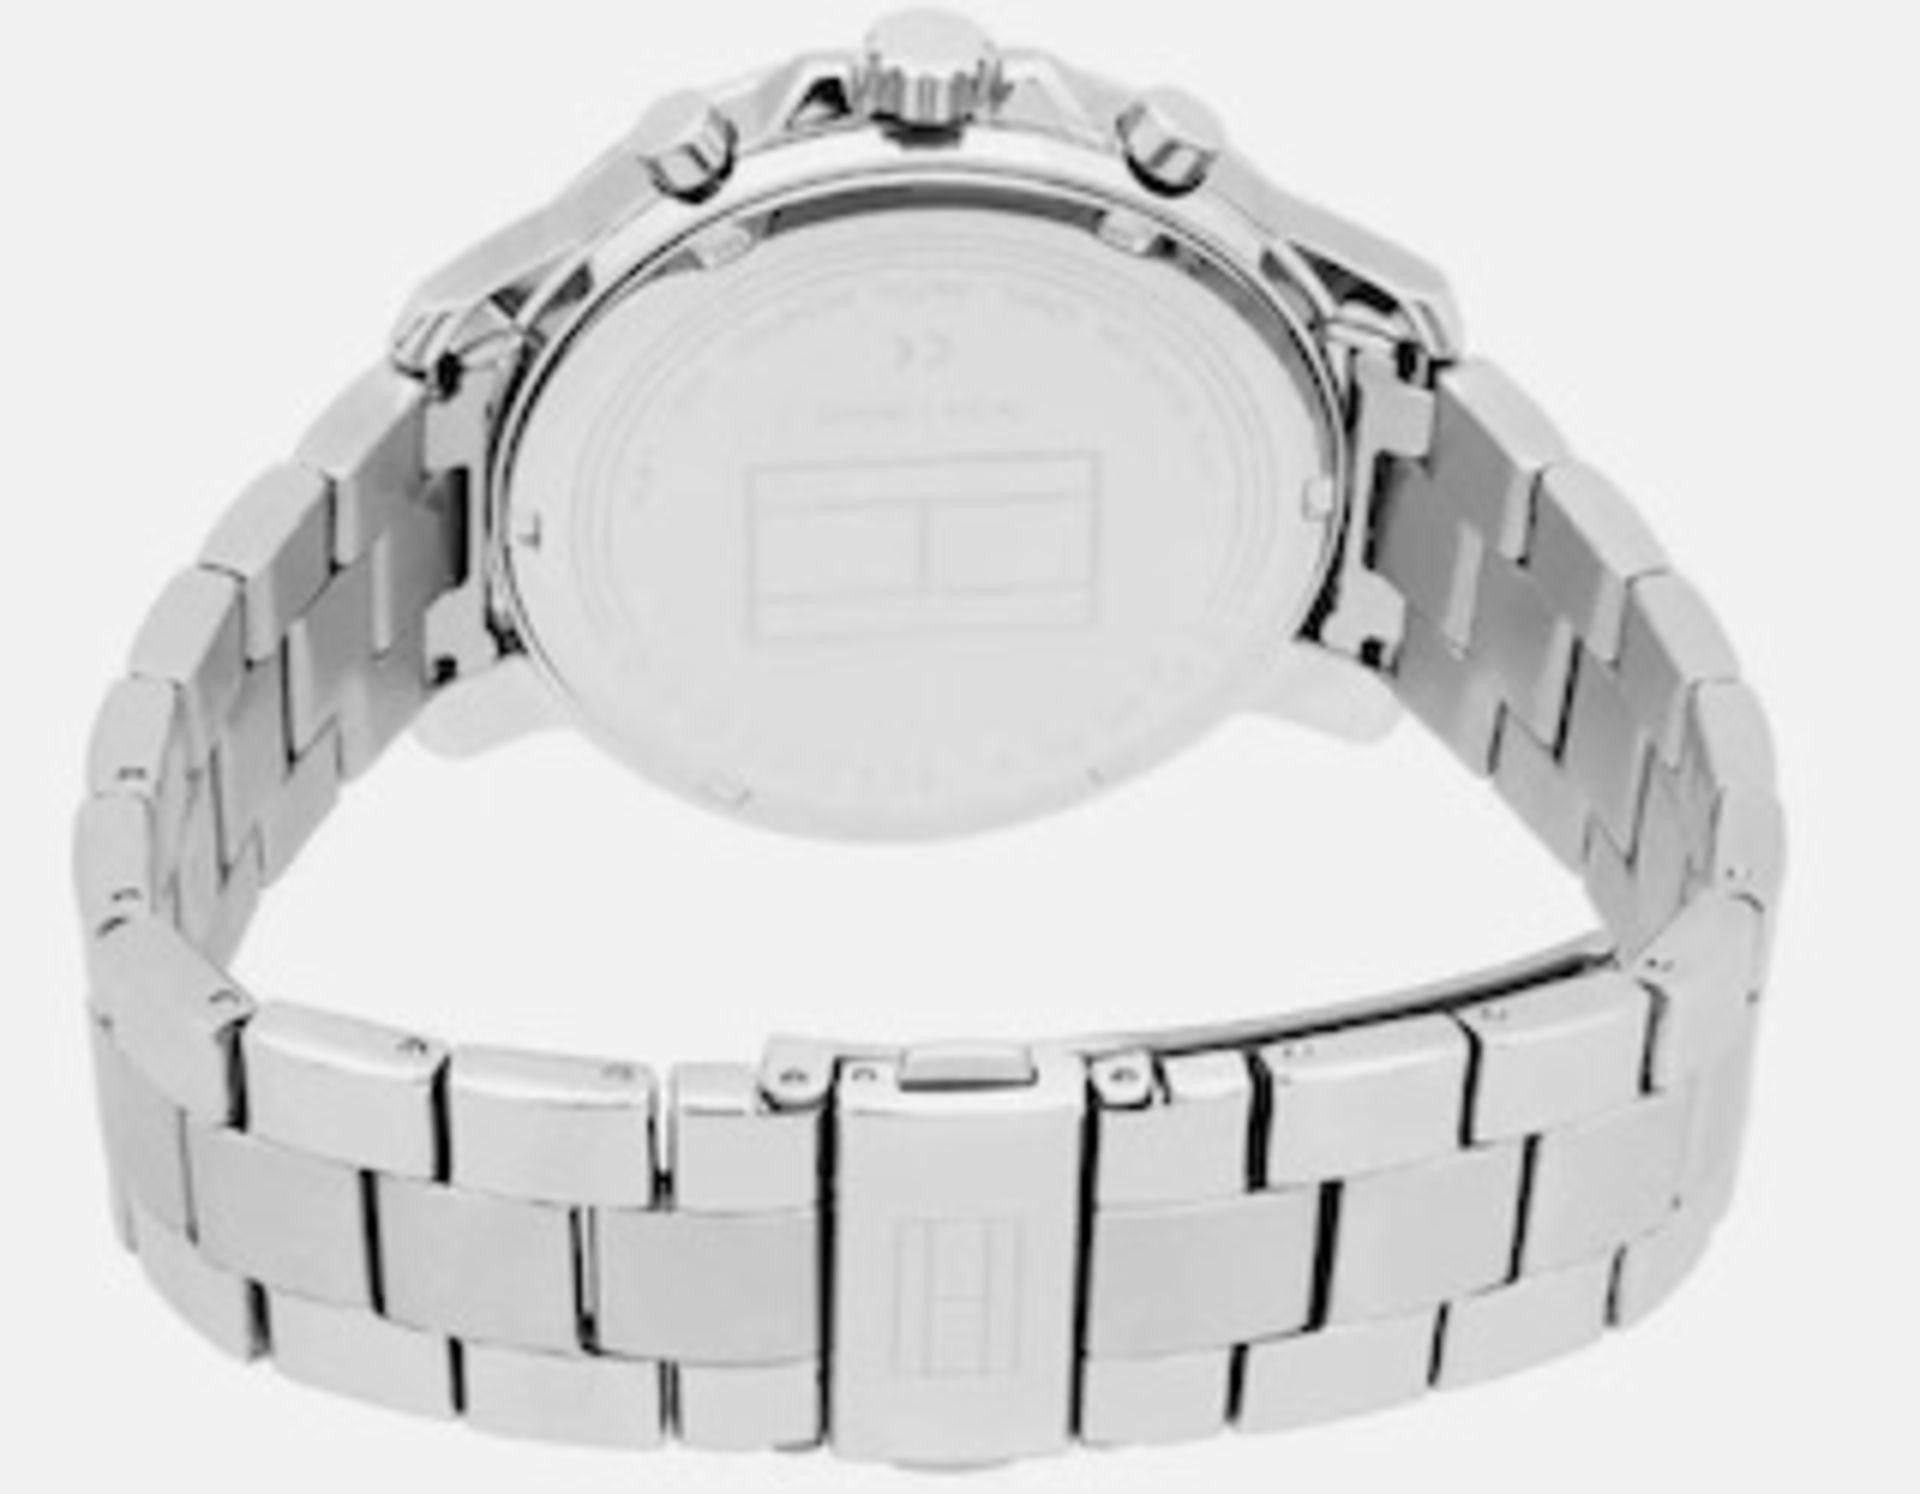 Tommy Hilfiger Men's Multi Dial Quartz Watch With Stainless Steel Strap 1791534 - Image 2 of 5